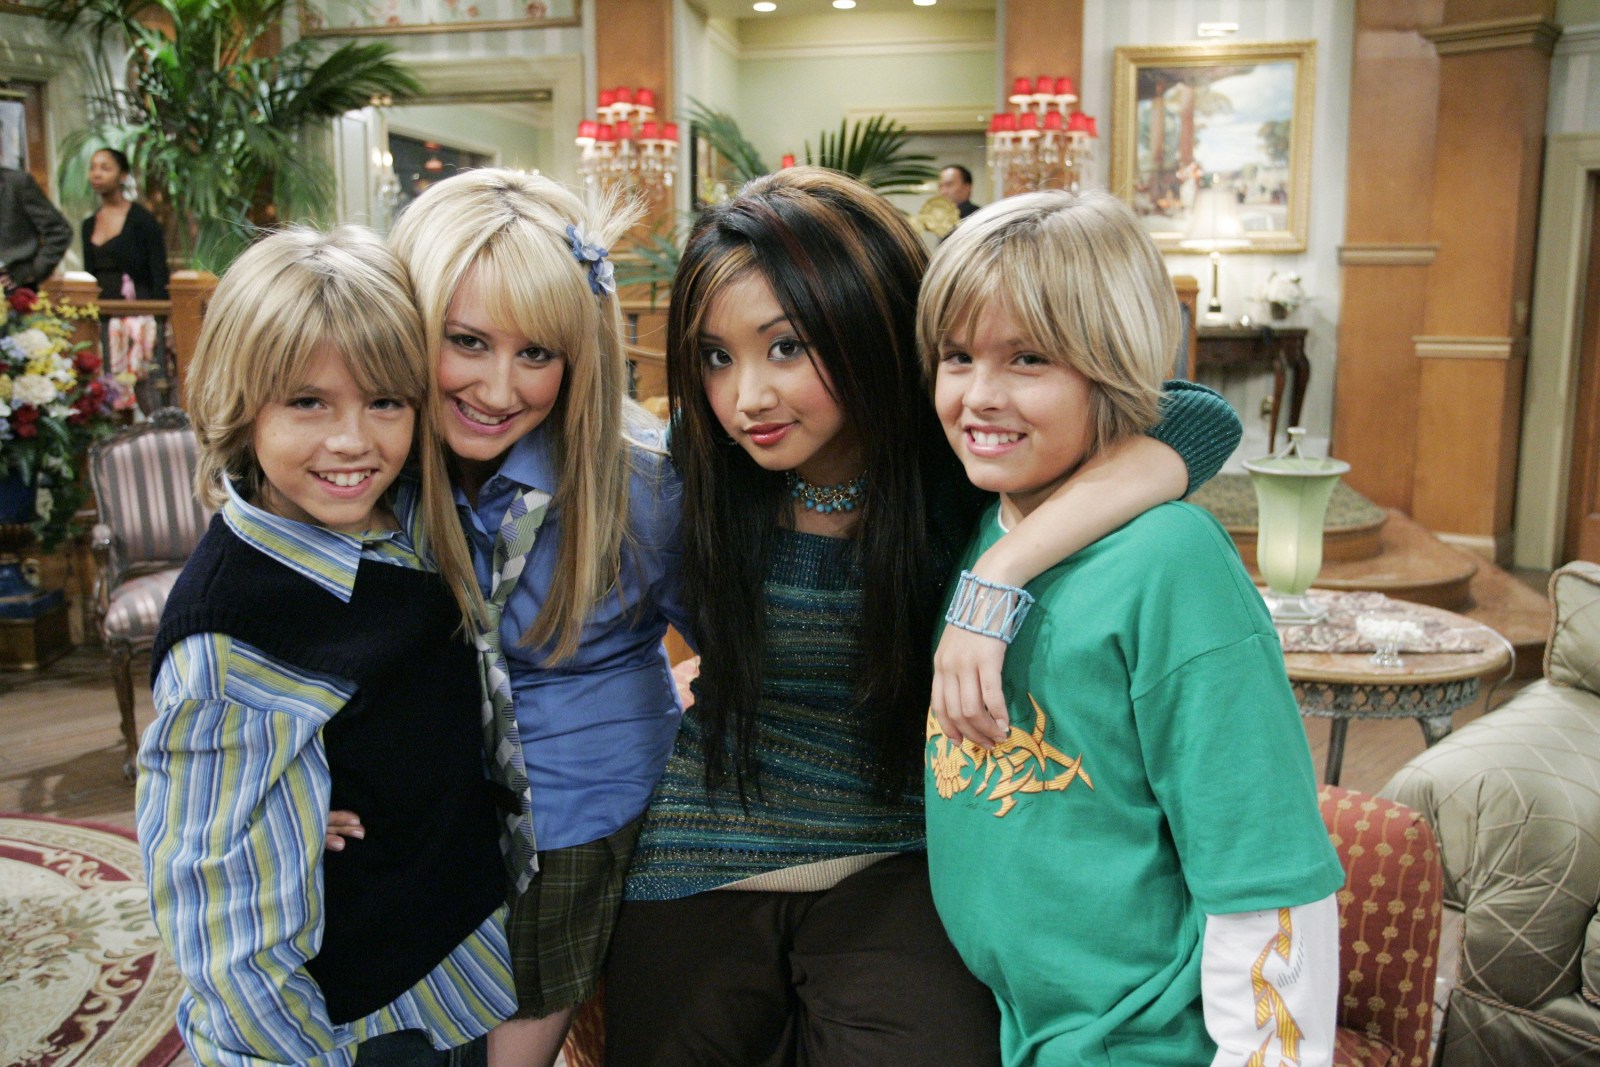 suite-life-of-zack-and-cody-on-set-behind-the-scenes-secrets